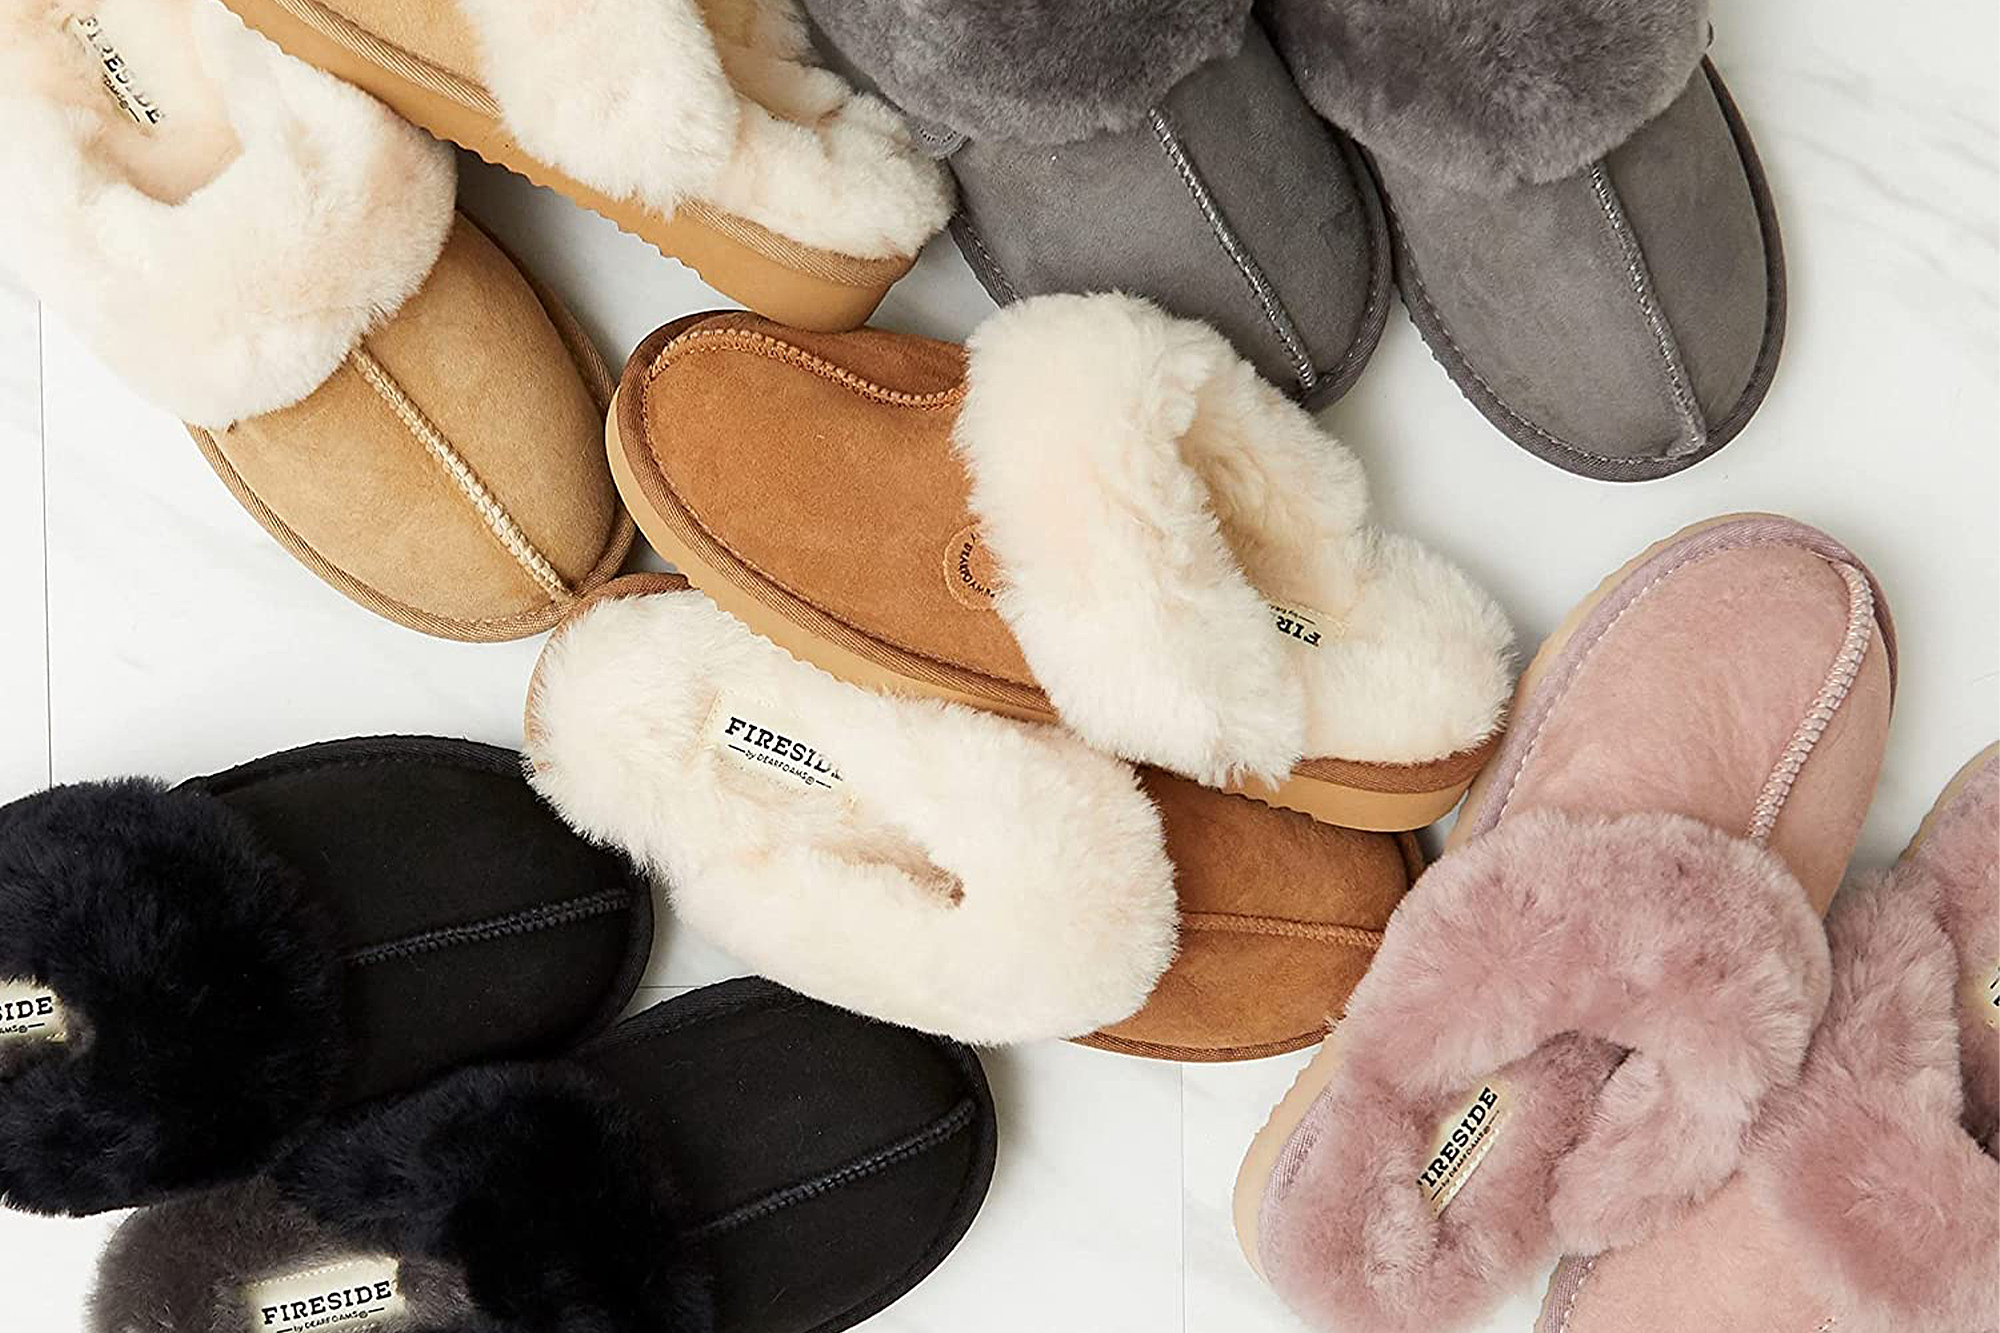 These $21 Amazon slippers look almost identical to a celebrity-loved pair  of UGGs